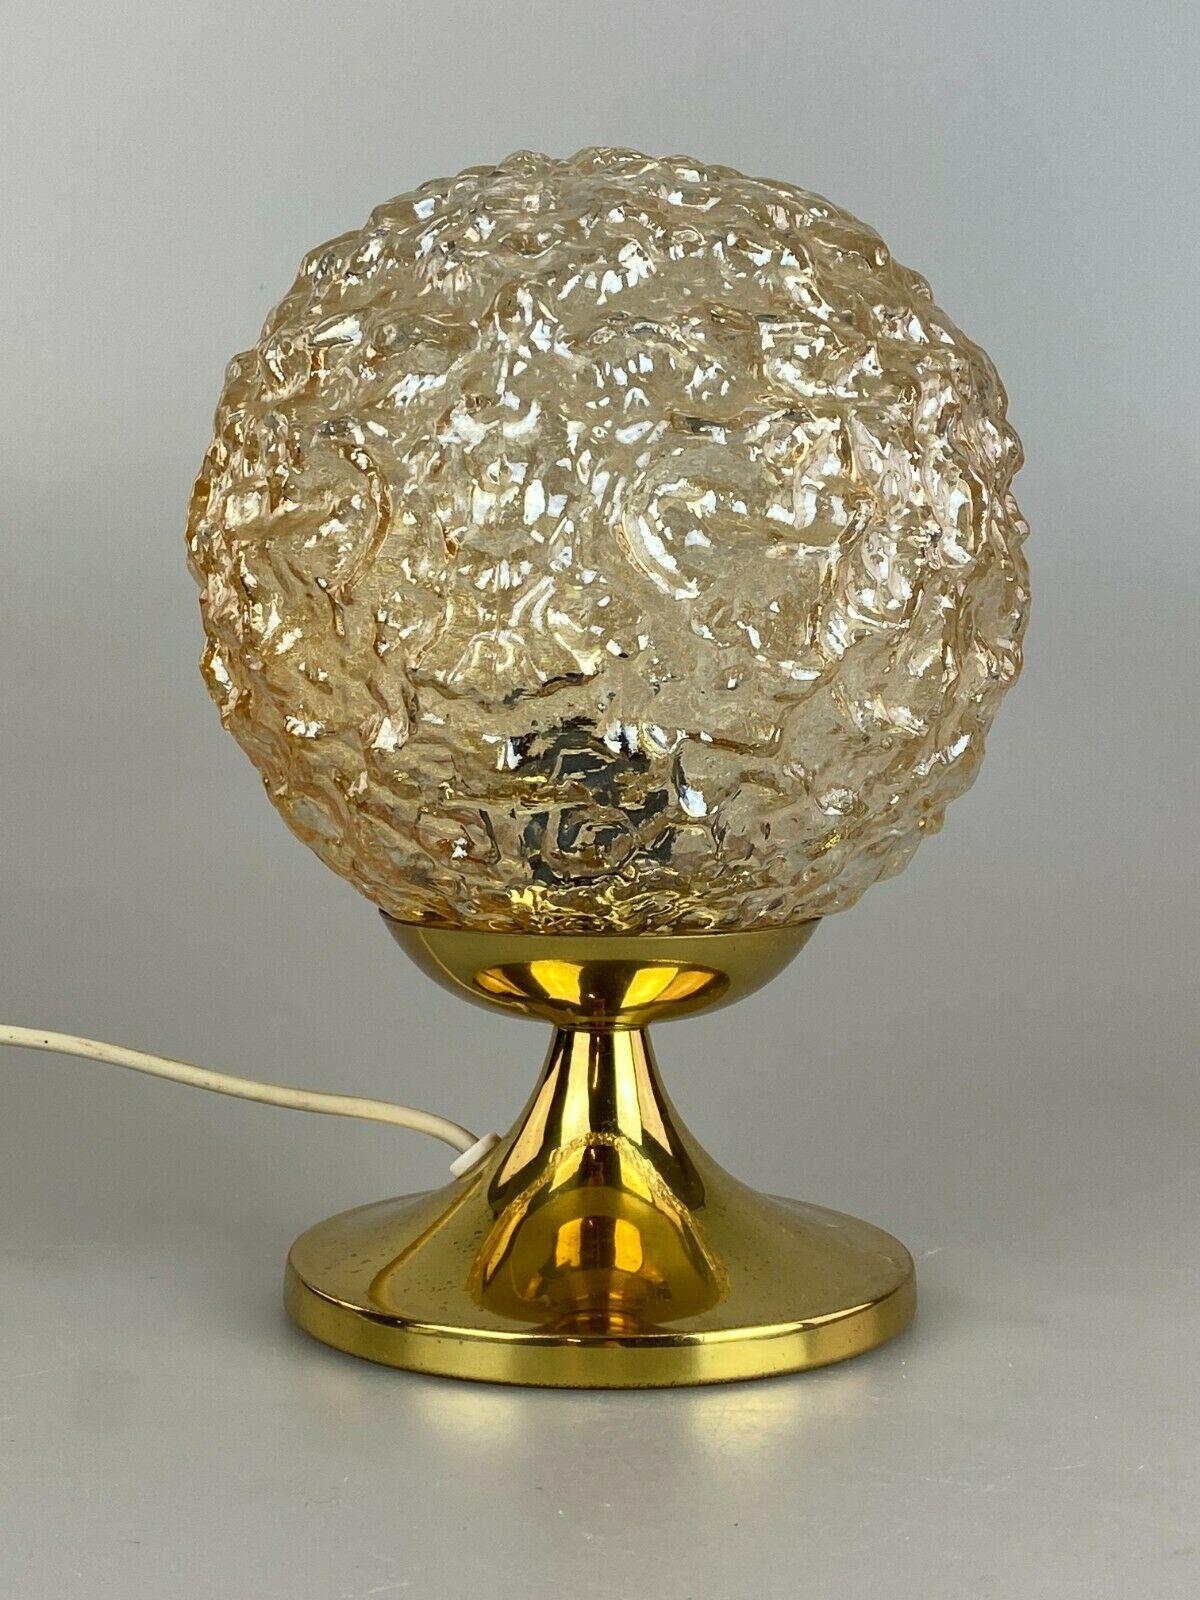 60s 70s ball lamp light table lamp bedside lamp space age design

Object: spherical lamp

Manufacturer:

Condition: good

Age: around 1960-1970

Dimensions:

Diameter = 15.5cm
Height = 21.5cm

Other notes:

The pictures serve as